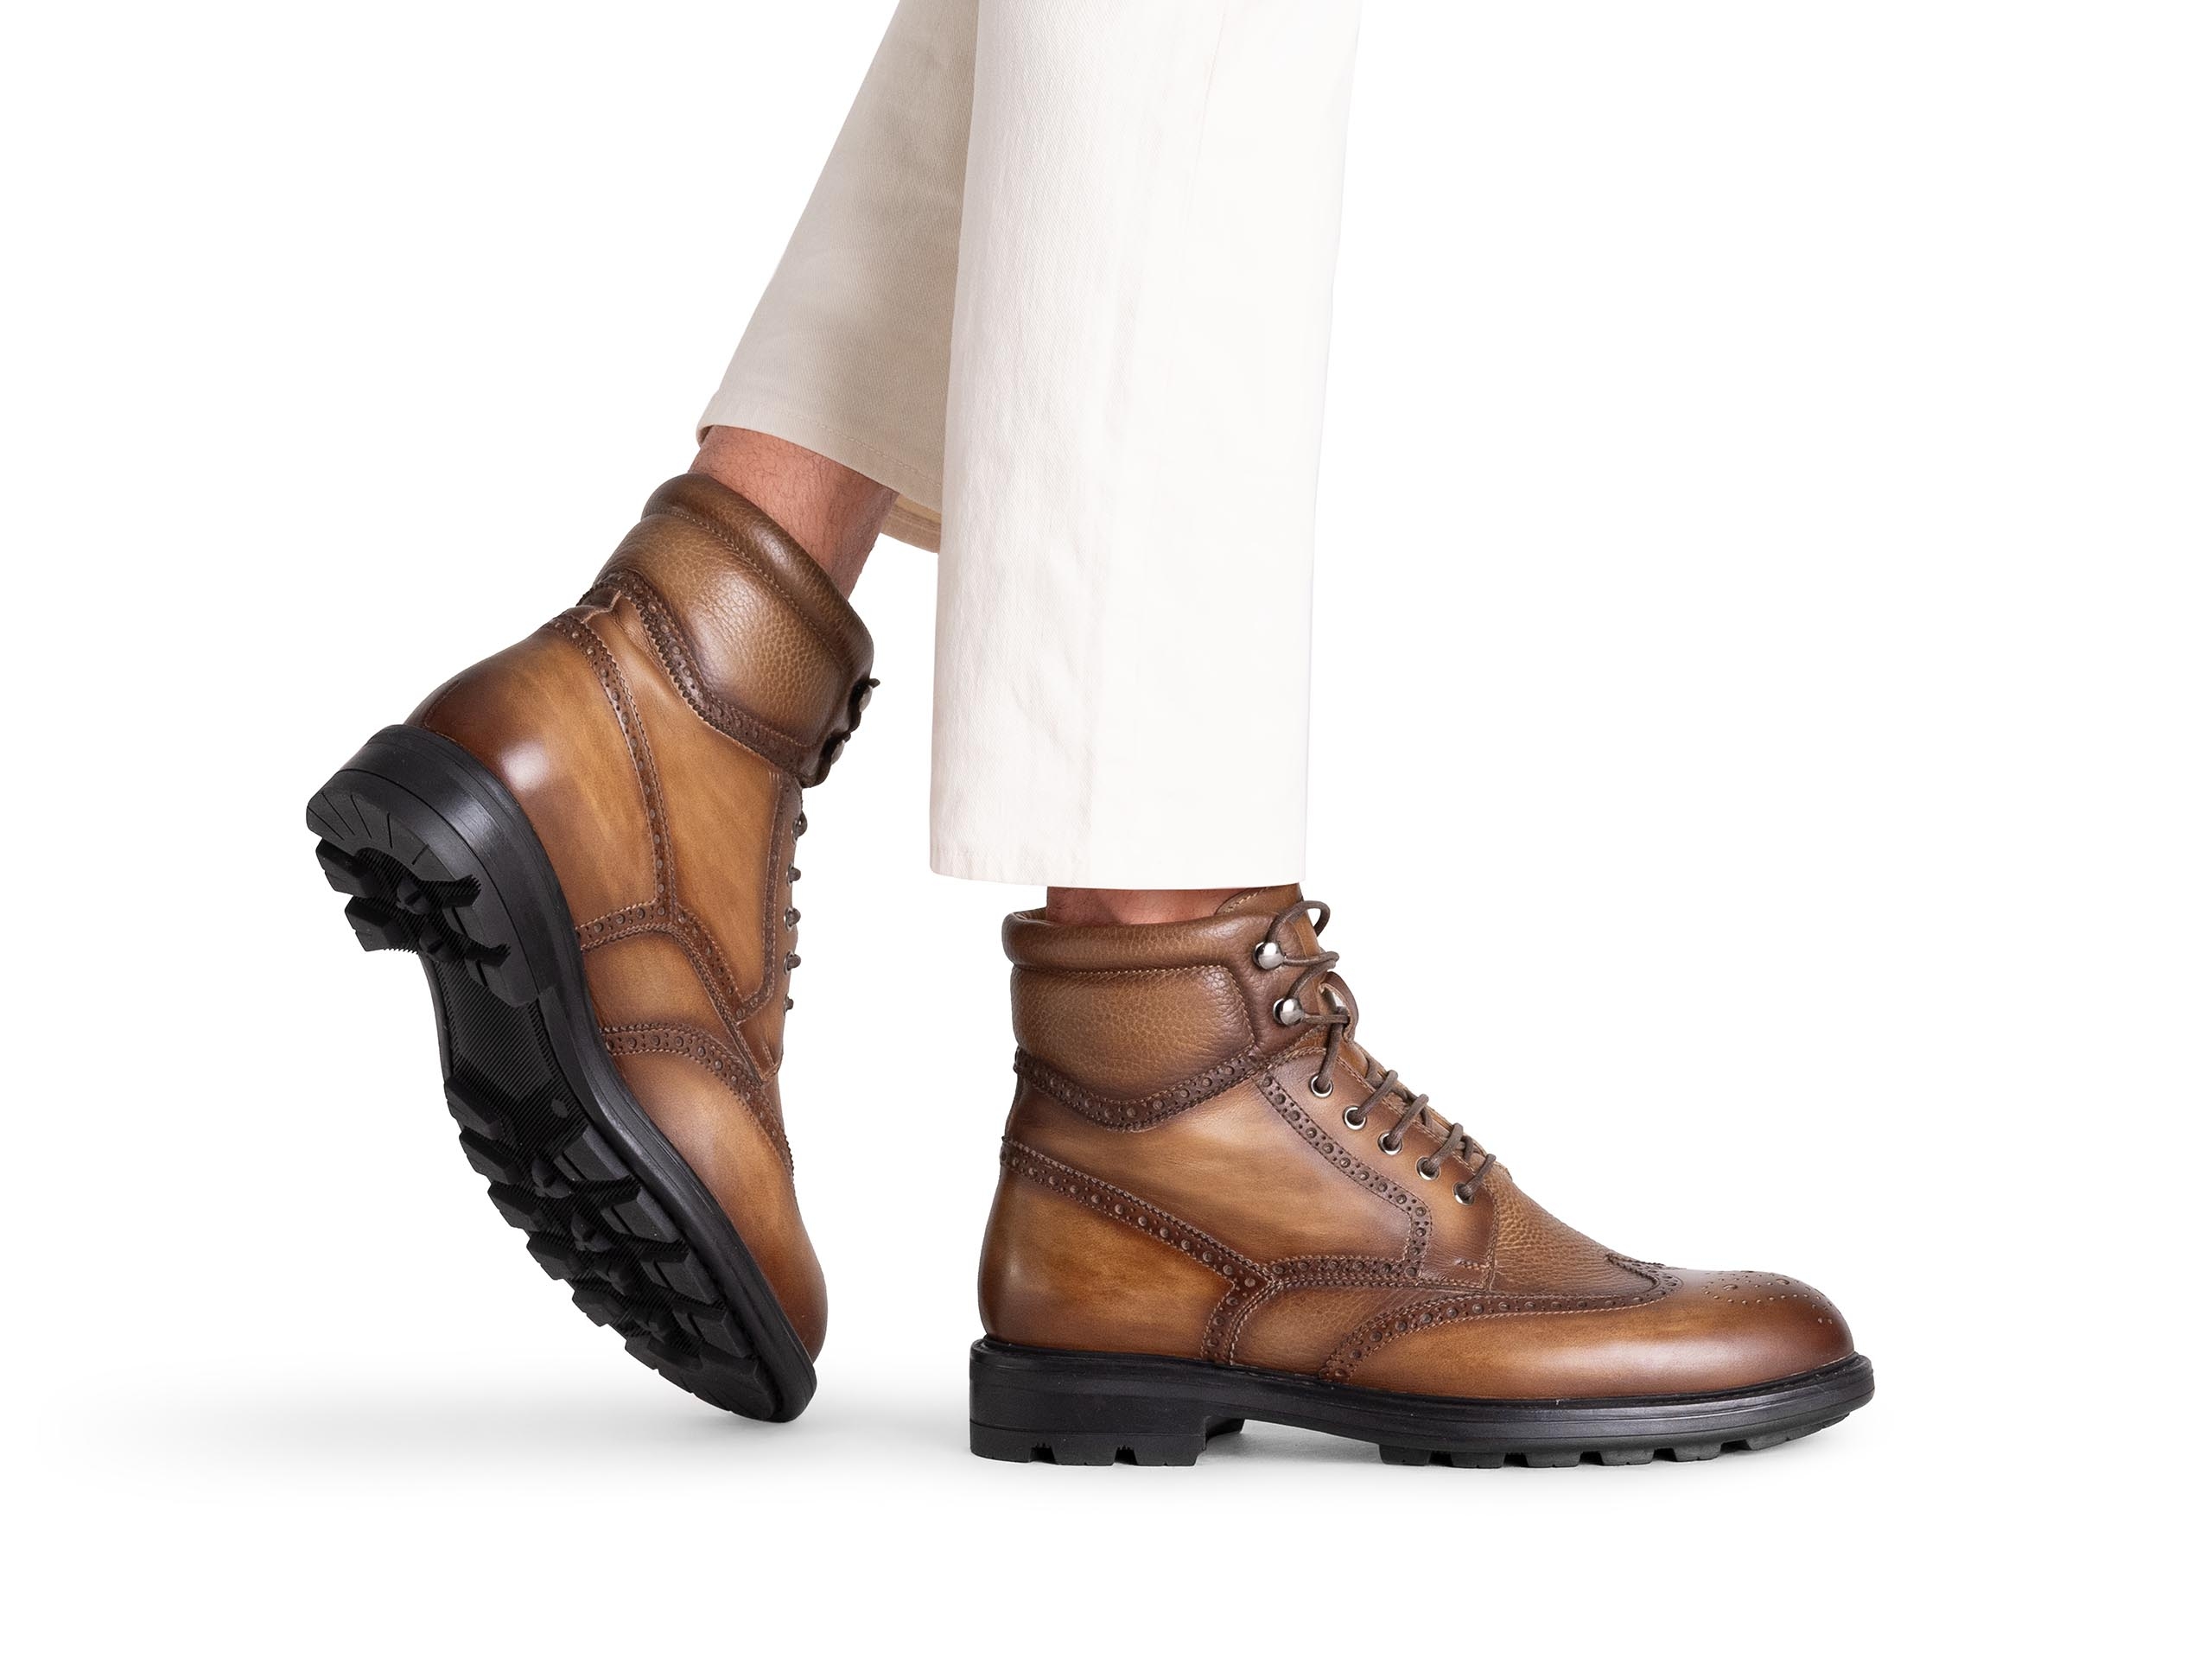 The Daroca Torba is paired well with light colored pants